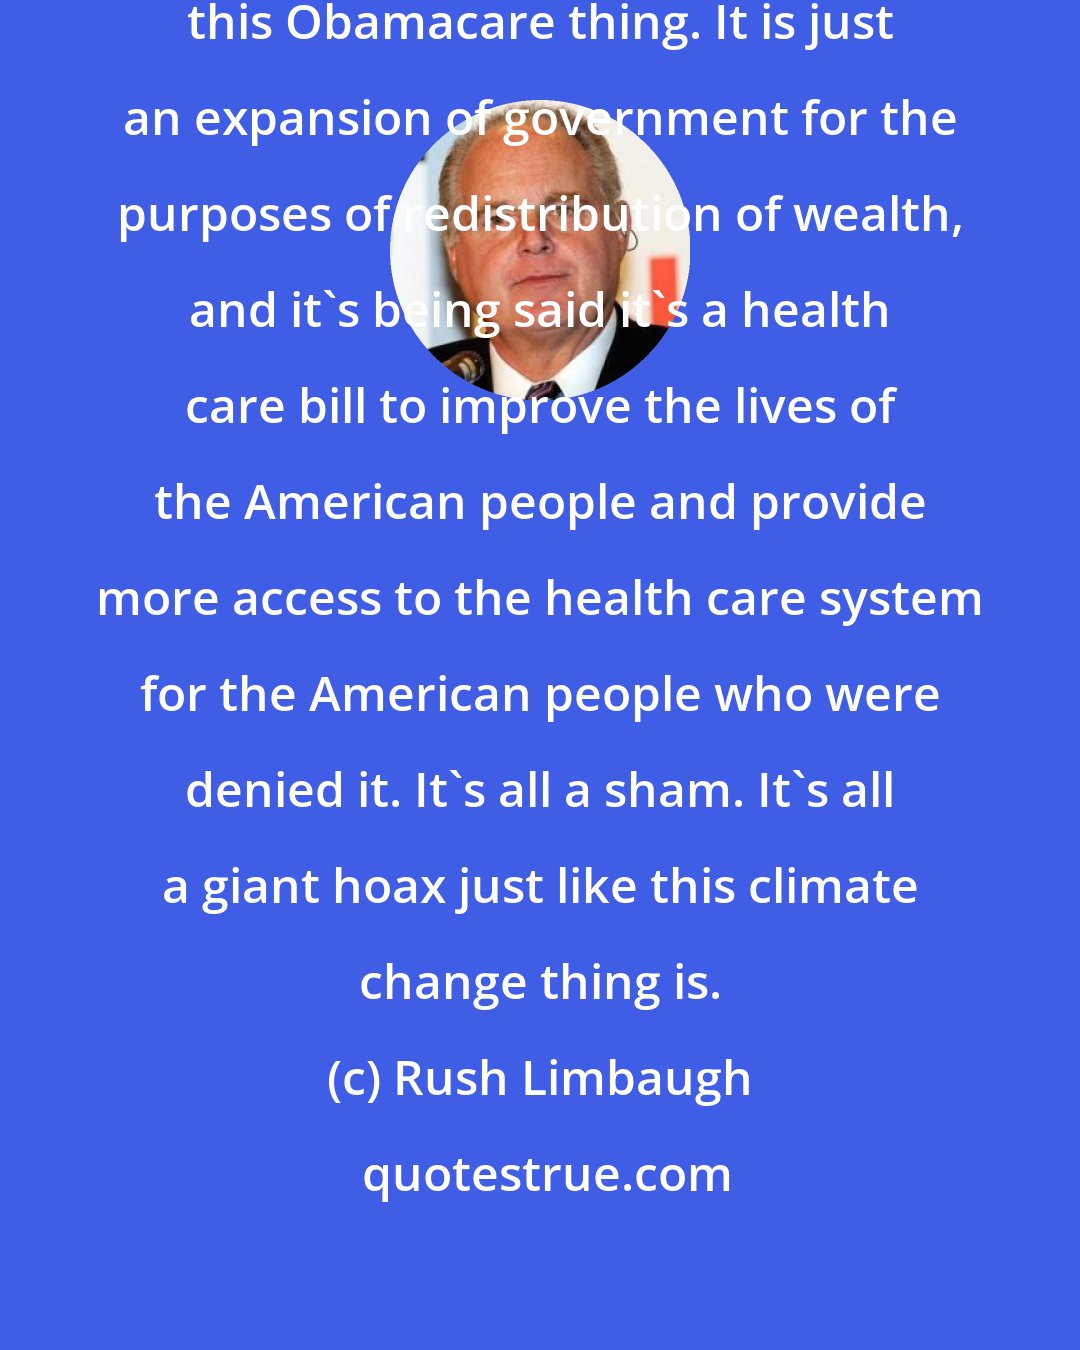 Rush Limbaugh: There are tax increases throughout this Obamacare thing. It is just an expansion of government for the purposes of redistribution of wealth, and it's being said it's a health care bill to improve the lives of the American people and provide more access to the health care system for the American people who were denied it. It's all a sham. It's all a giant hoax just like this climate change thing is.